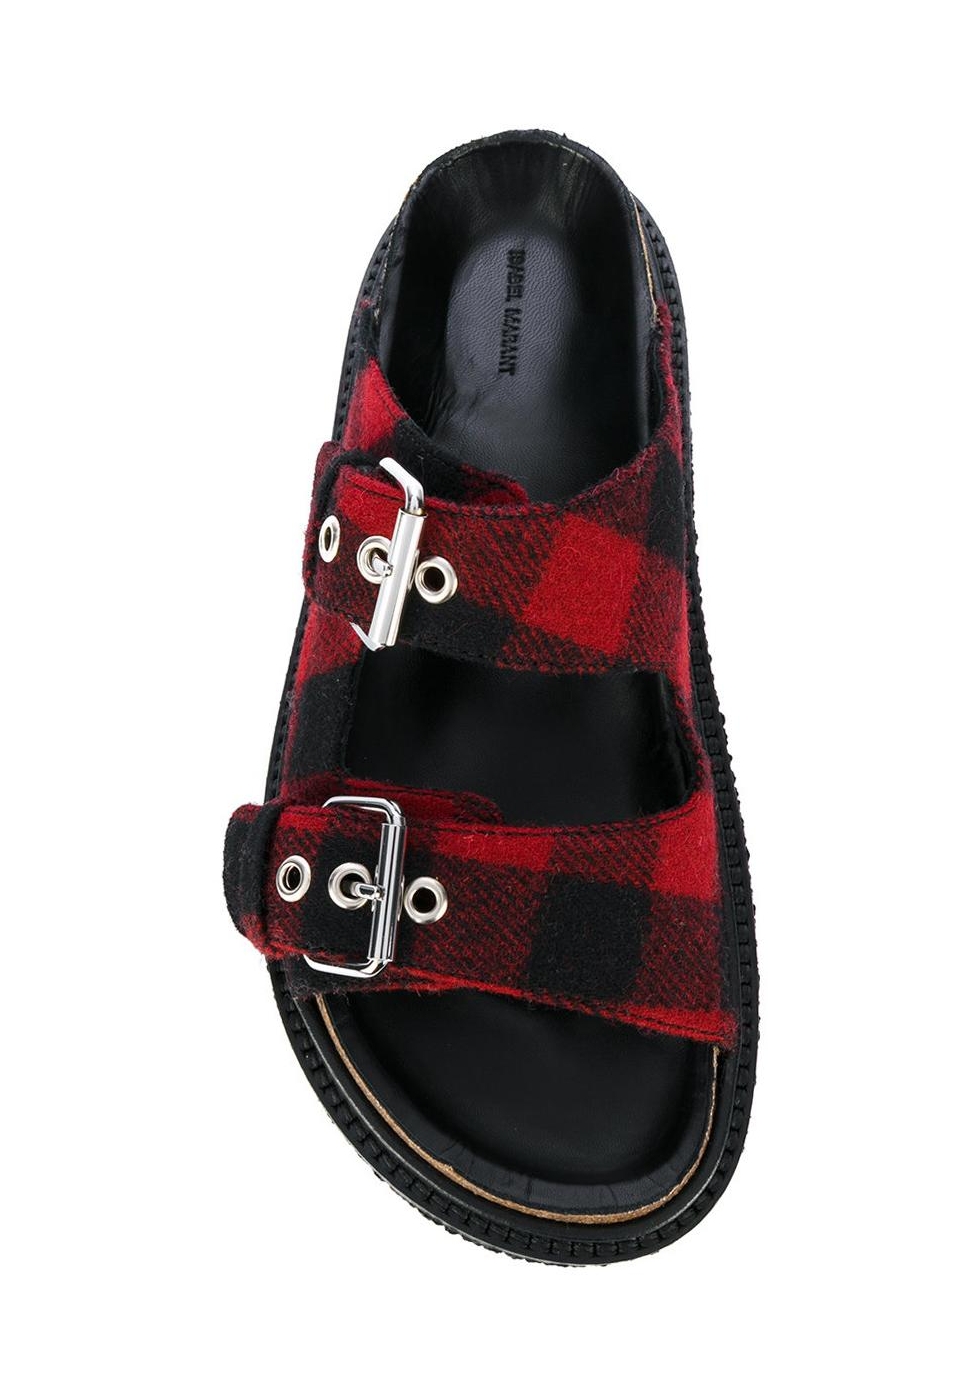 Isabel Marant slippers in red/black Fabric - Italian Boutique